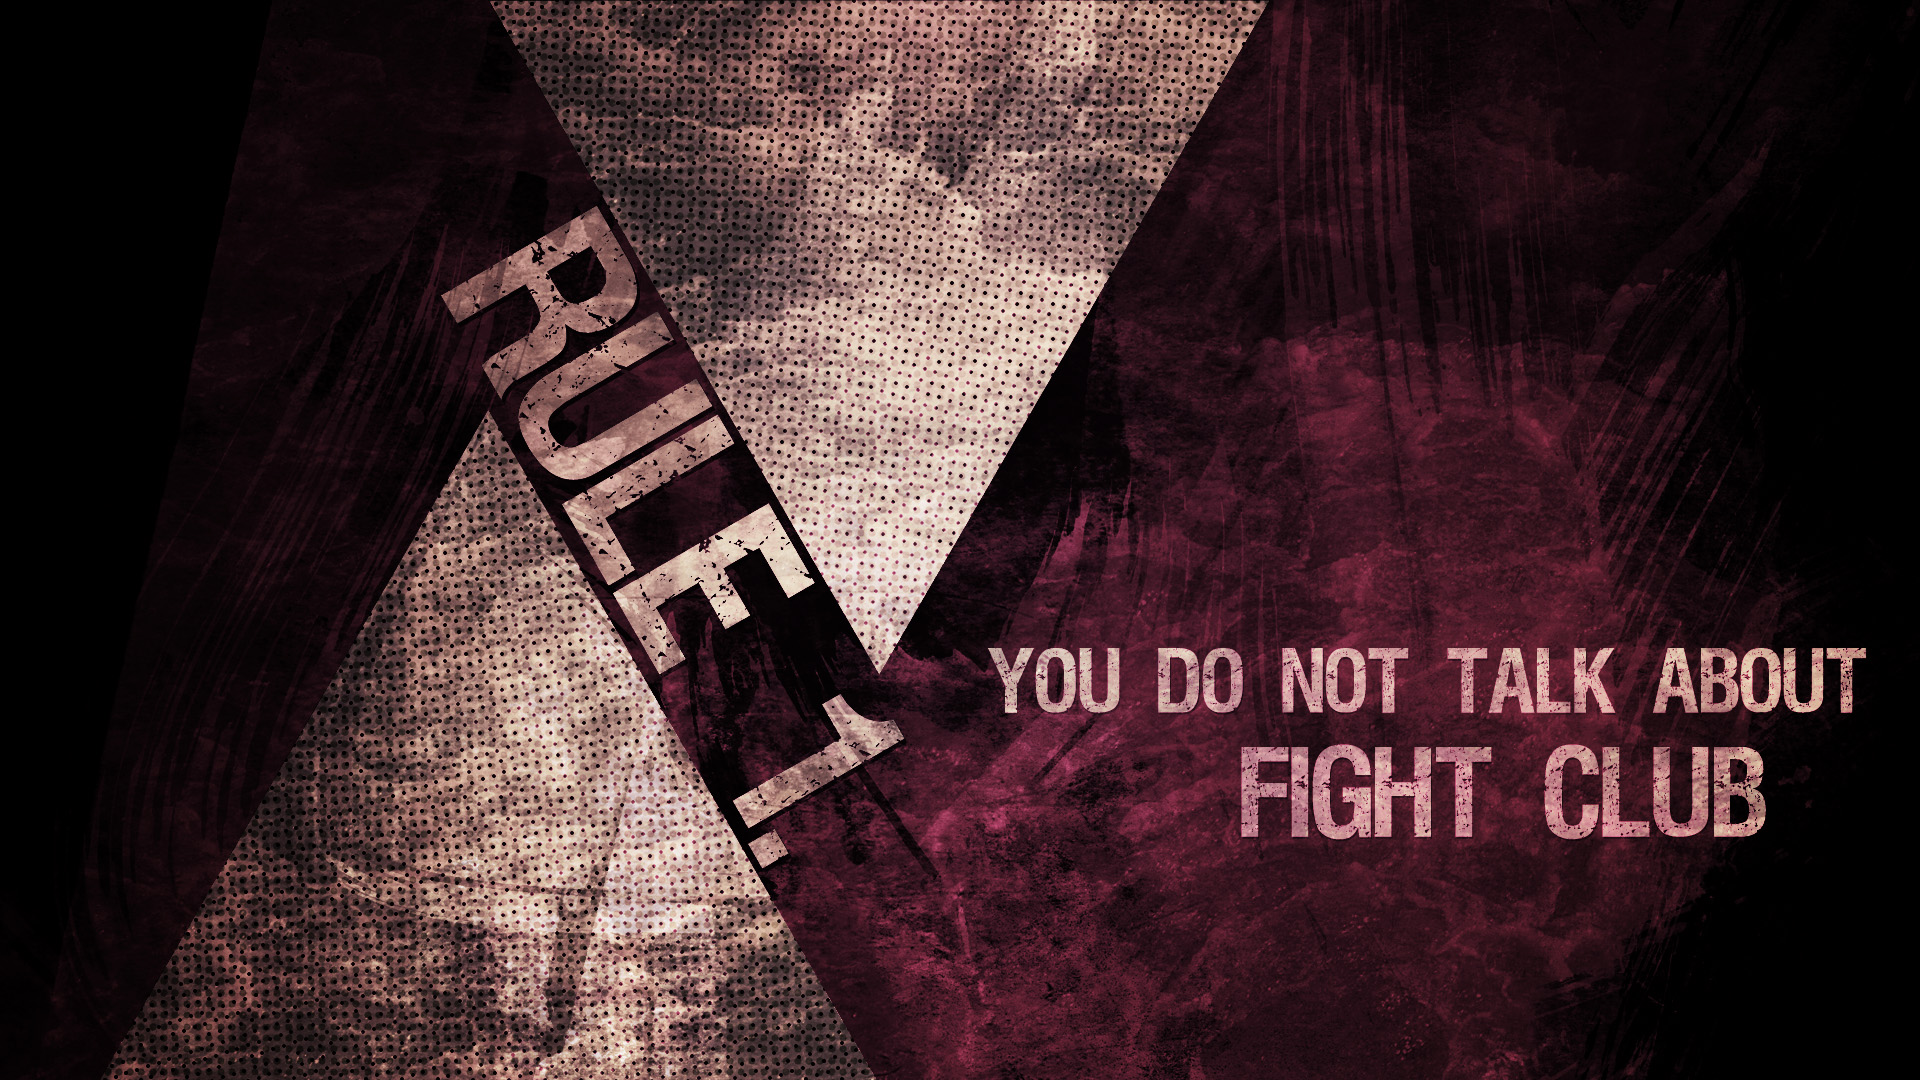 movies, rules, quotes, Fight Club - desktop wallpaper